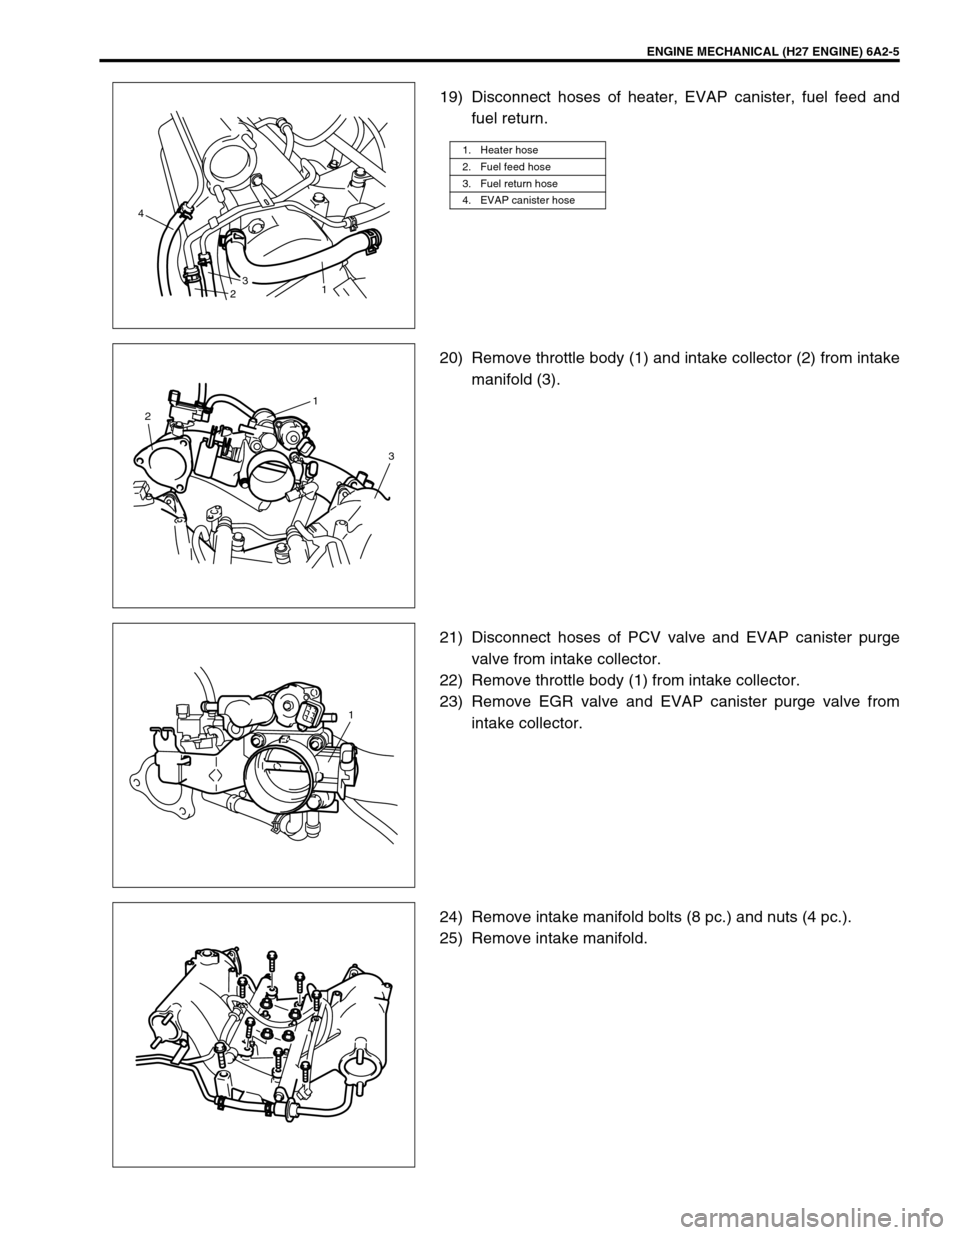 SUZUKI GRAND VITARA 2001 2.G Owners Manual ENGINE MECHANICAL (H27 ENGINE) 6A2-5
19) Disconnect hoses of heater, EVAP canister, fuel feed and
fuel return.
20) Remove throttle body (1) and intake collector (2) from intake
manifold (3).
21) Disco